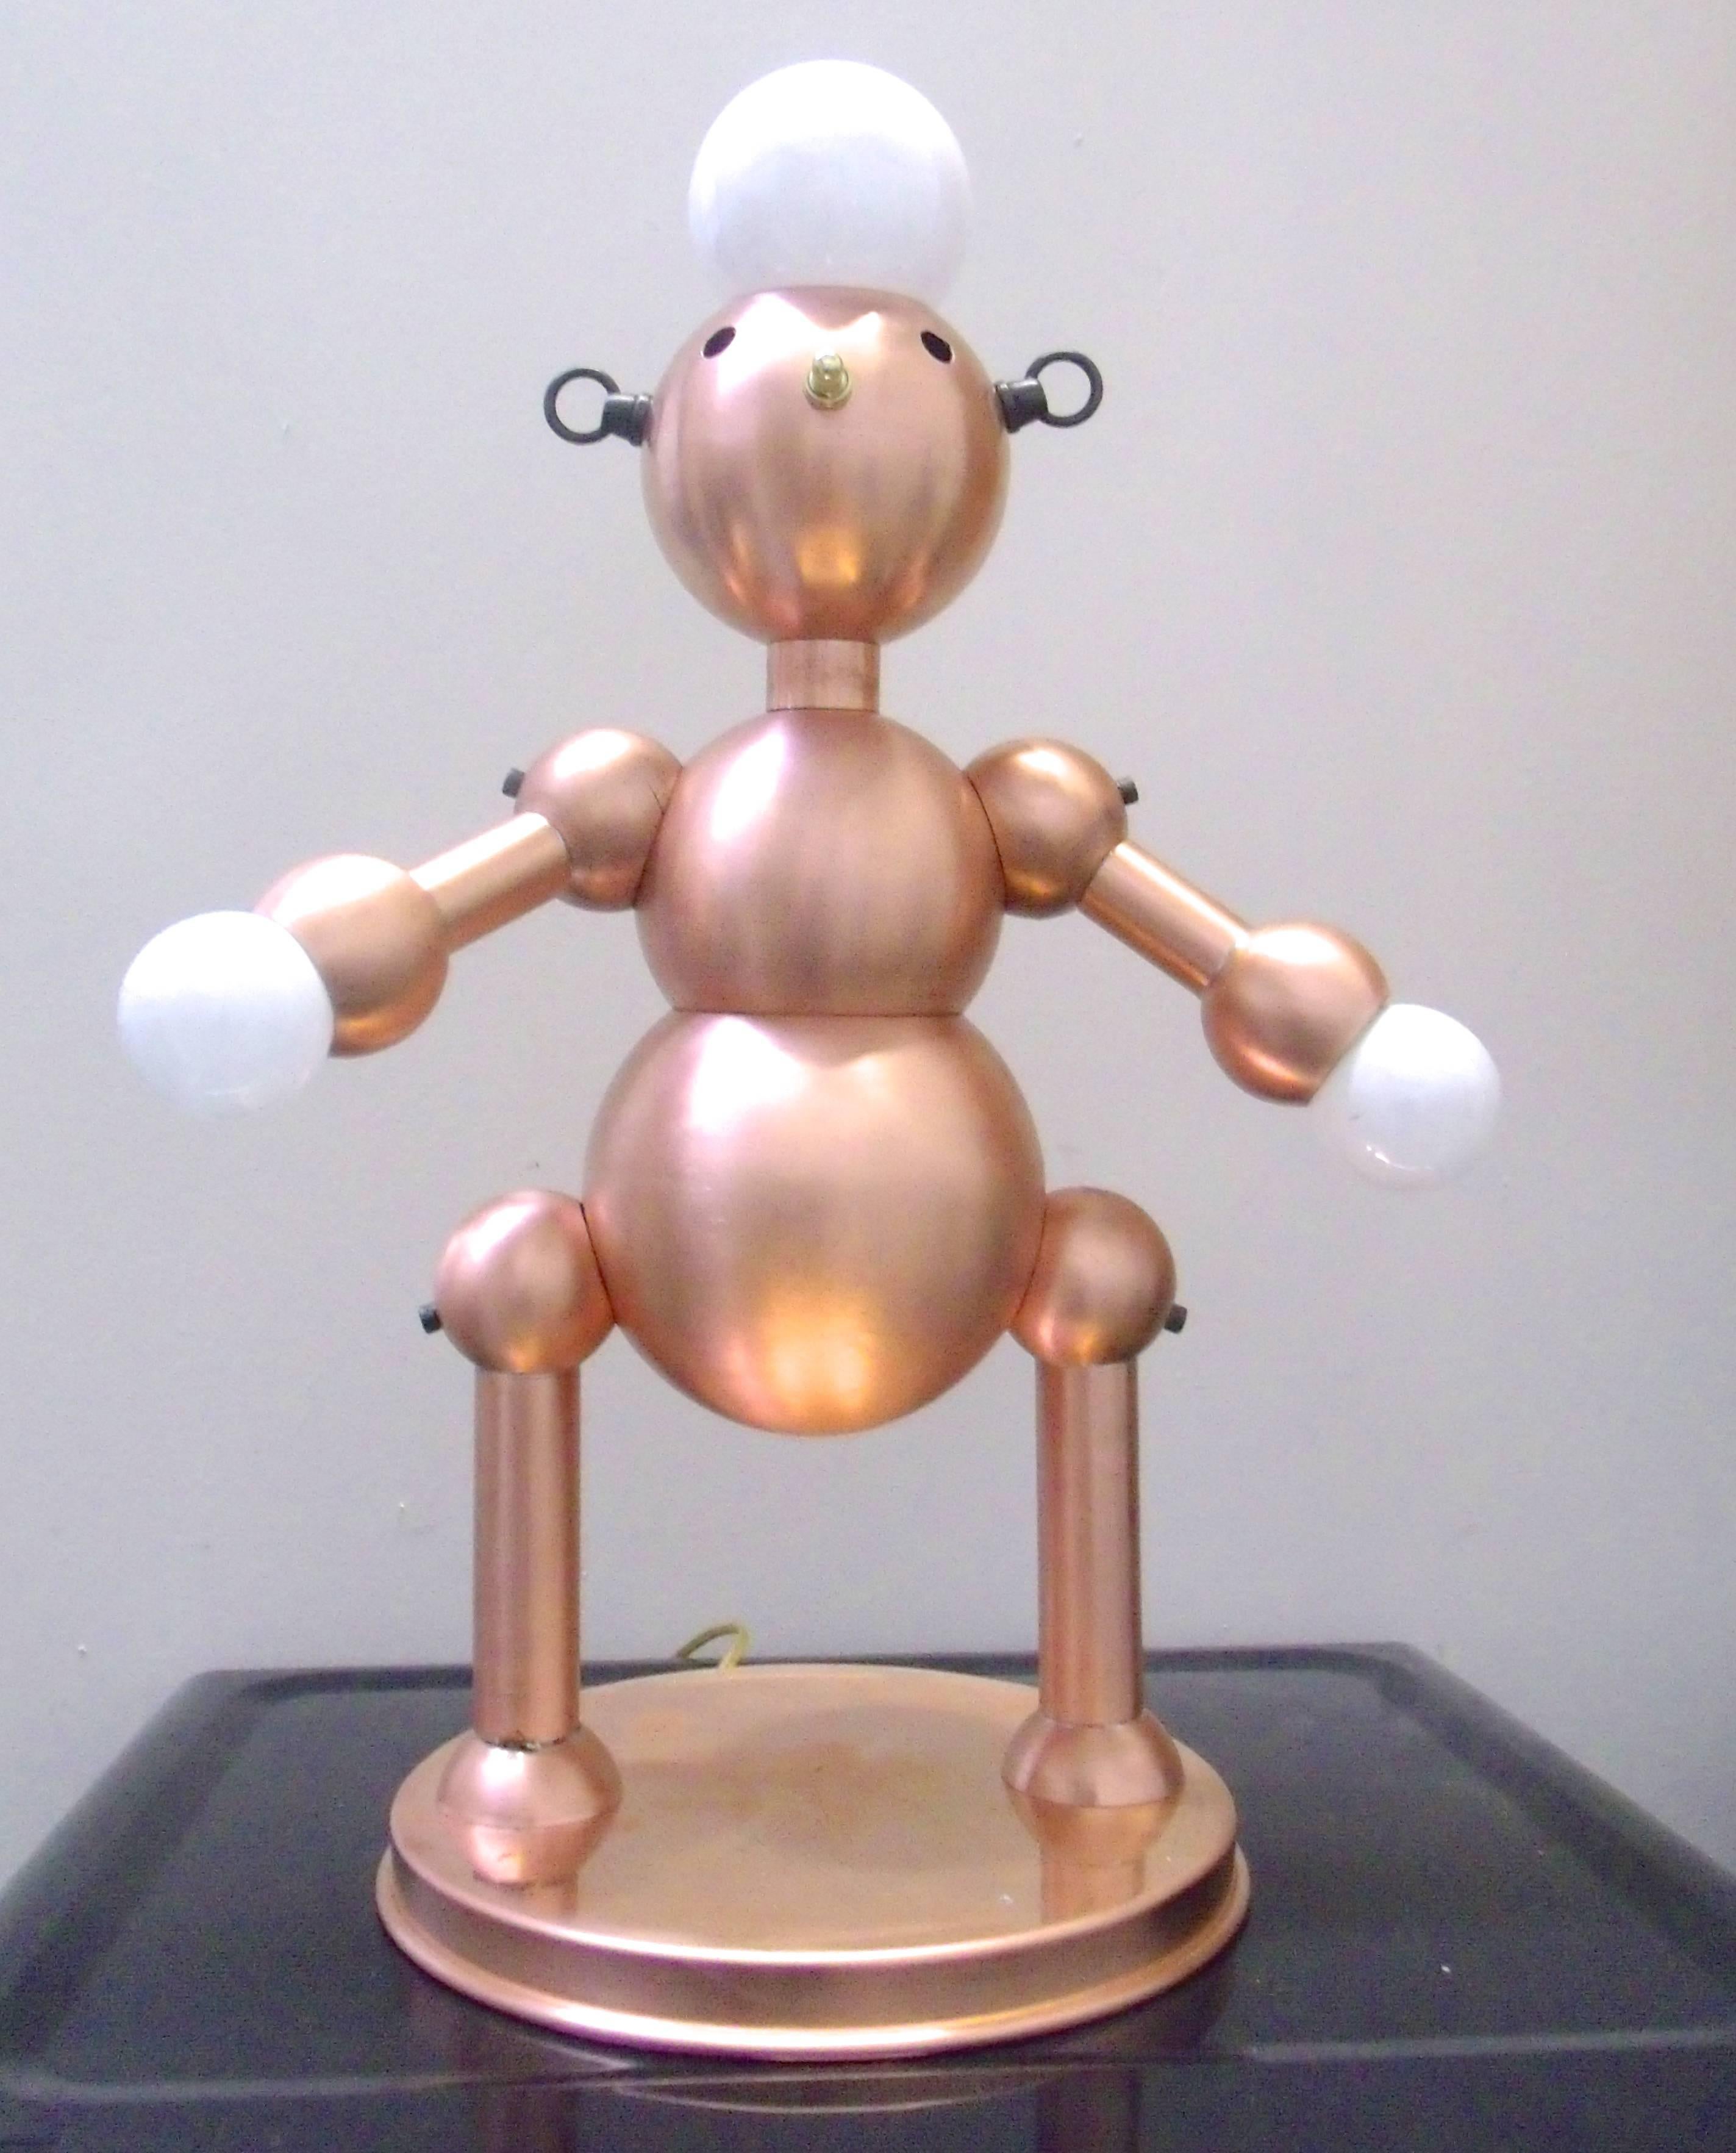 Silver Plated Robot Lamp 2